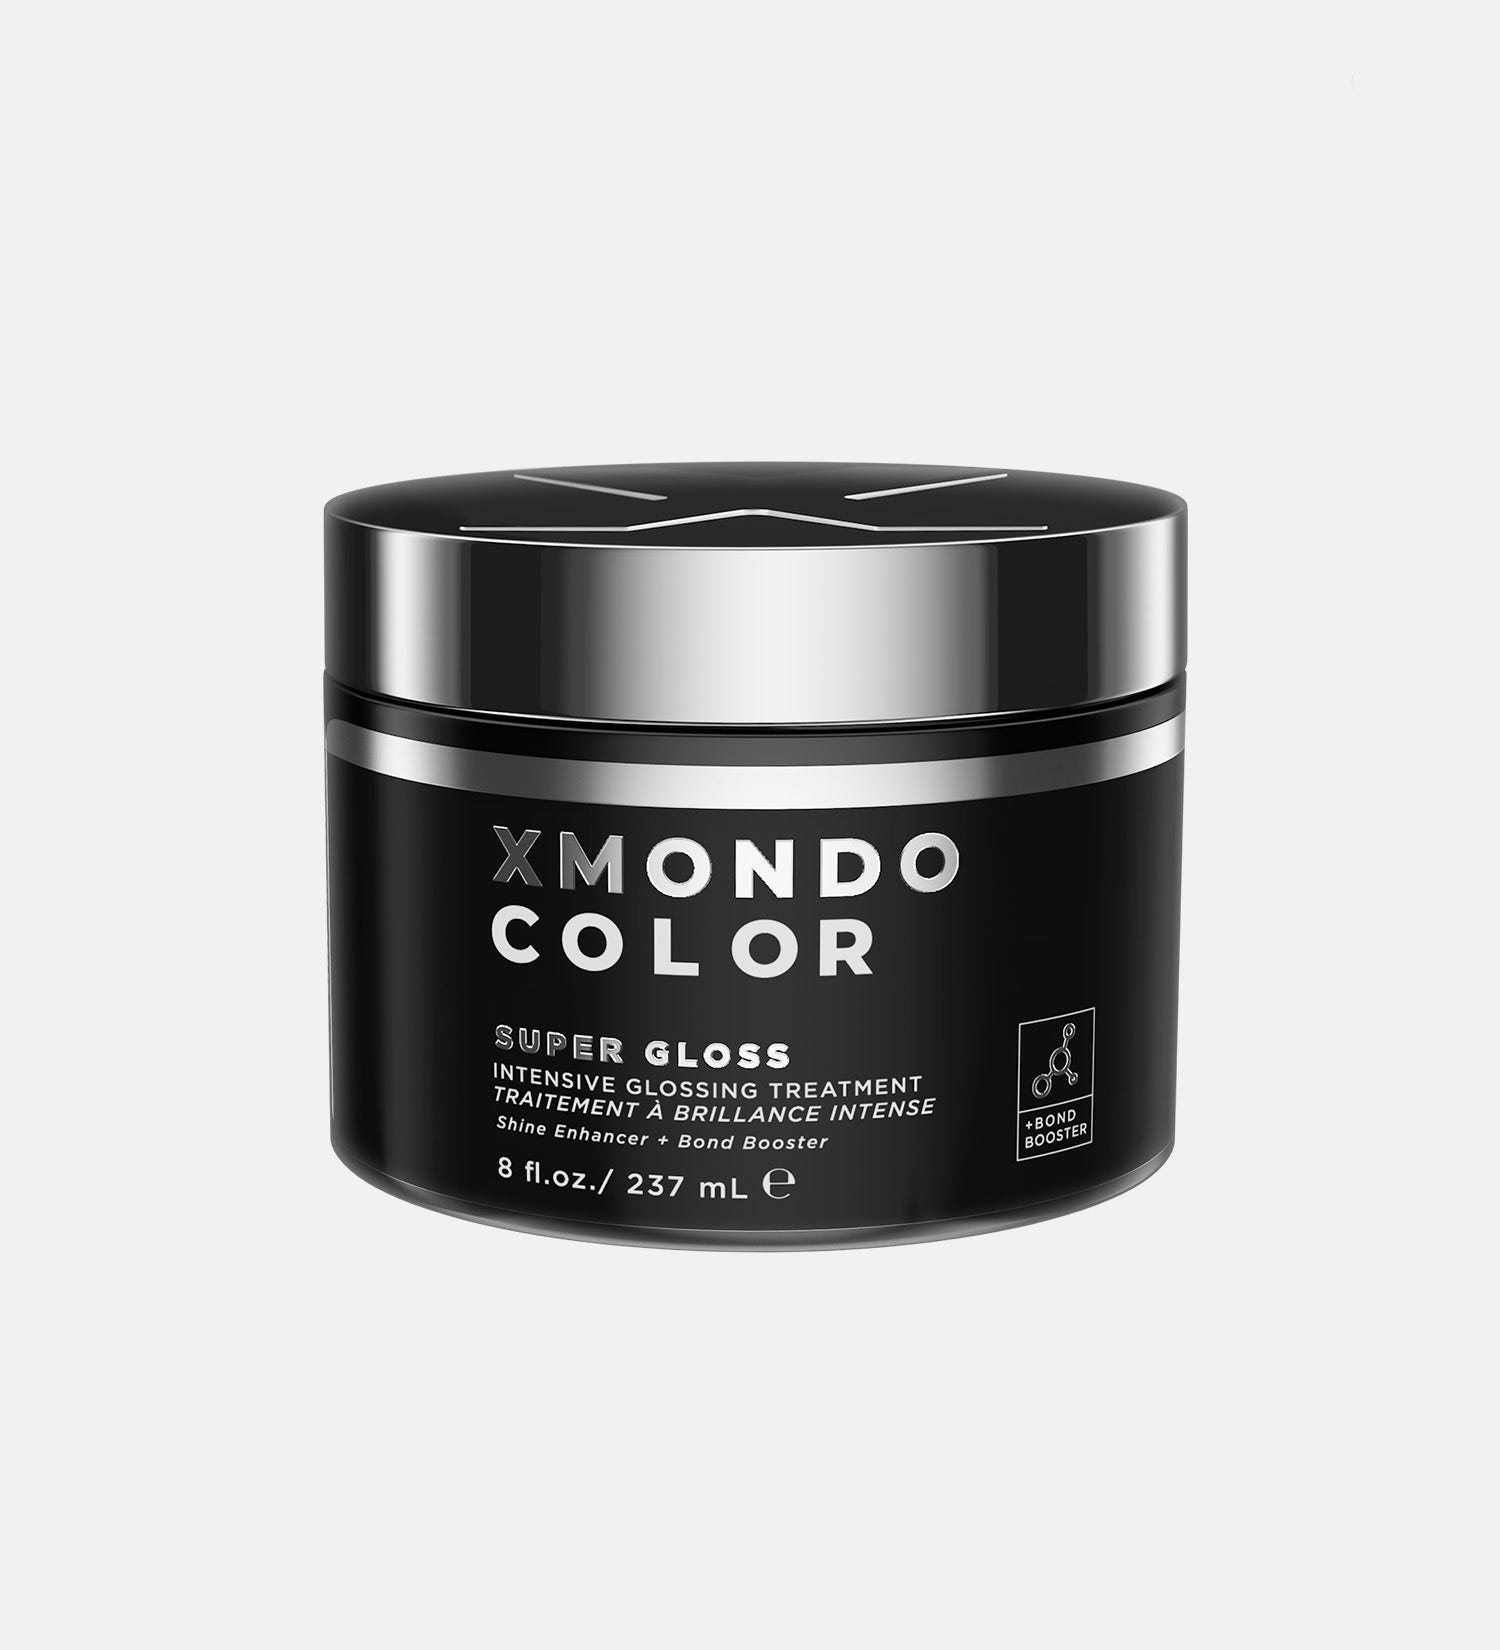 Super Gloss hair healing color by XMONDO Color product jar